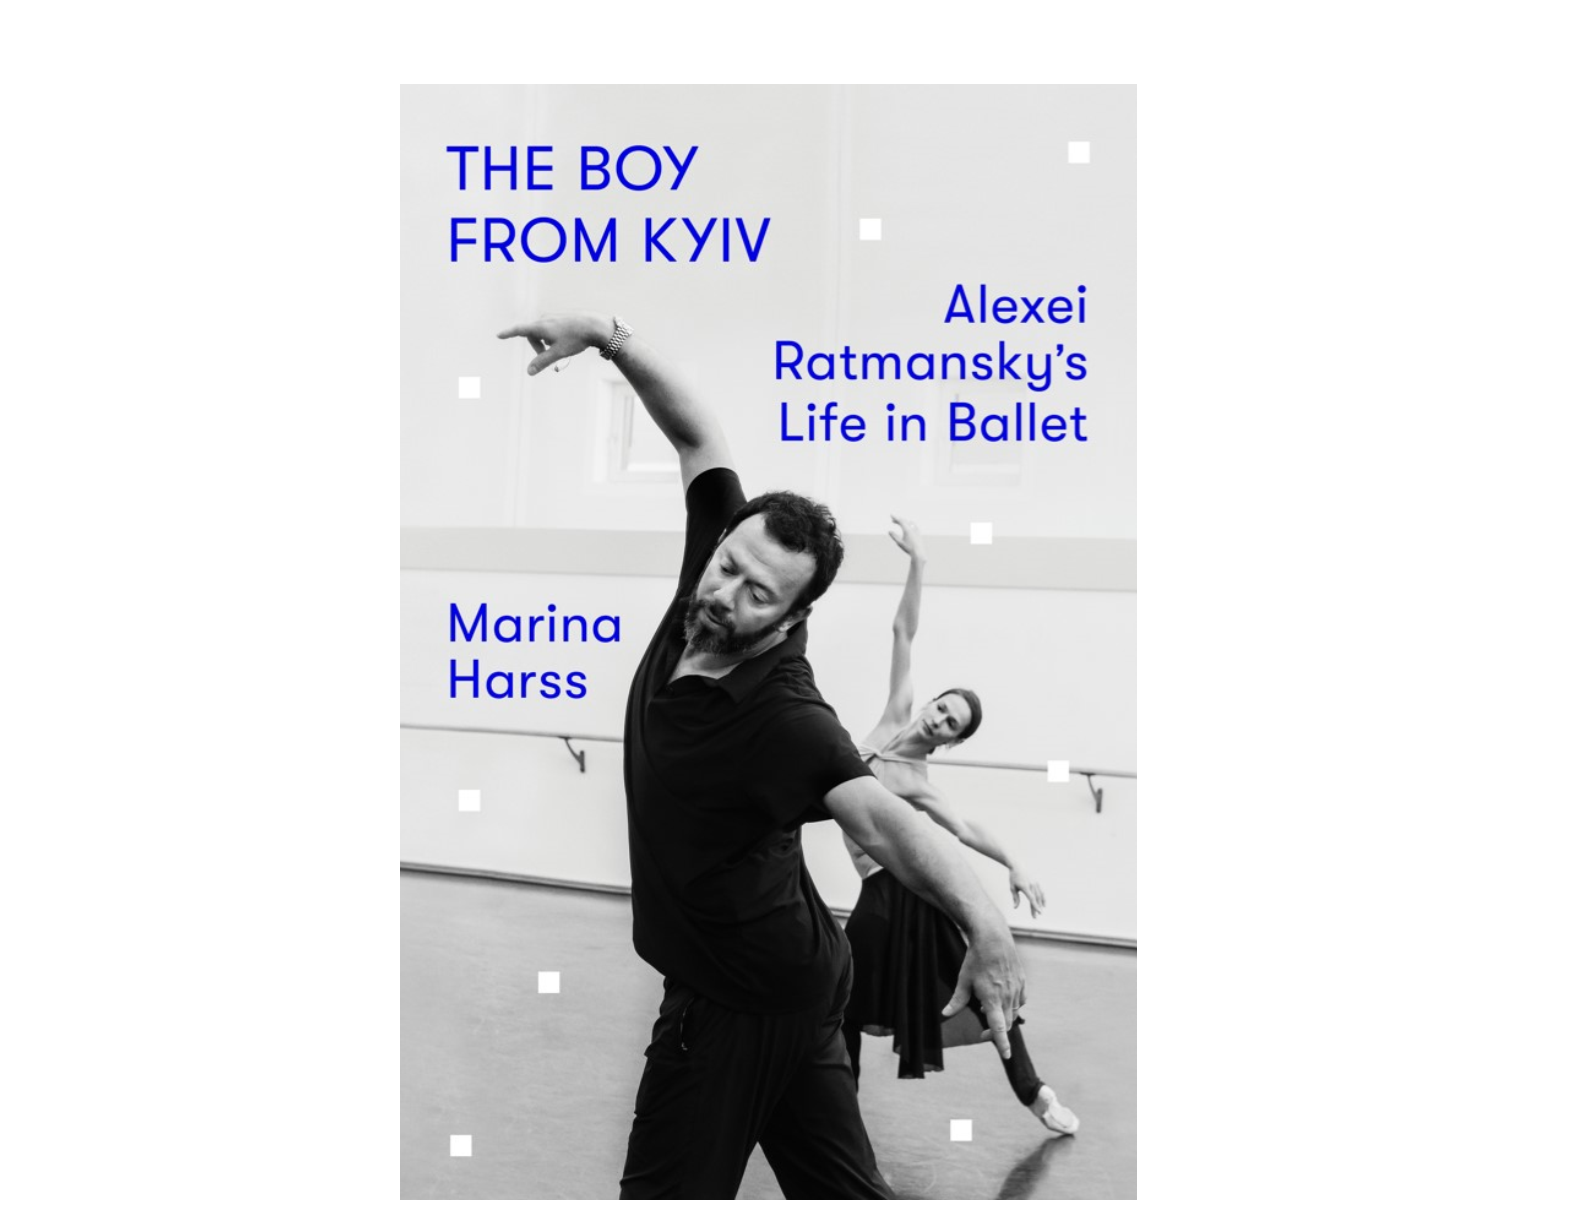 a book cover with a male dancer and leading a female dancer behind him